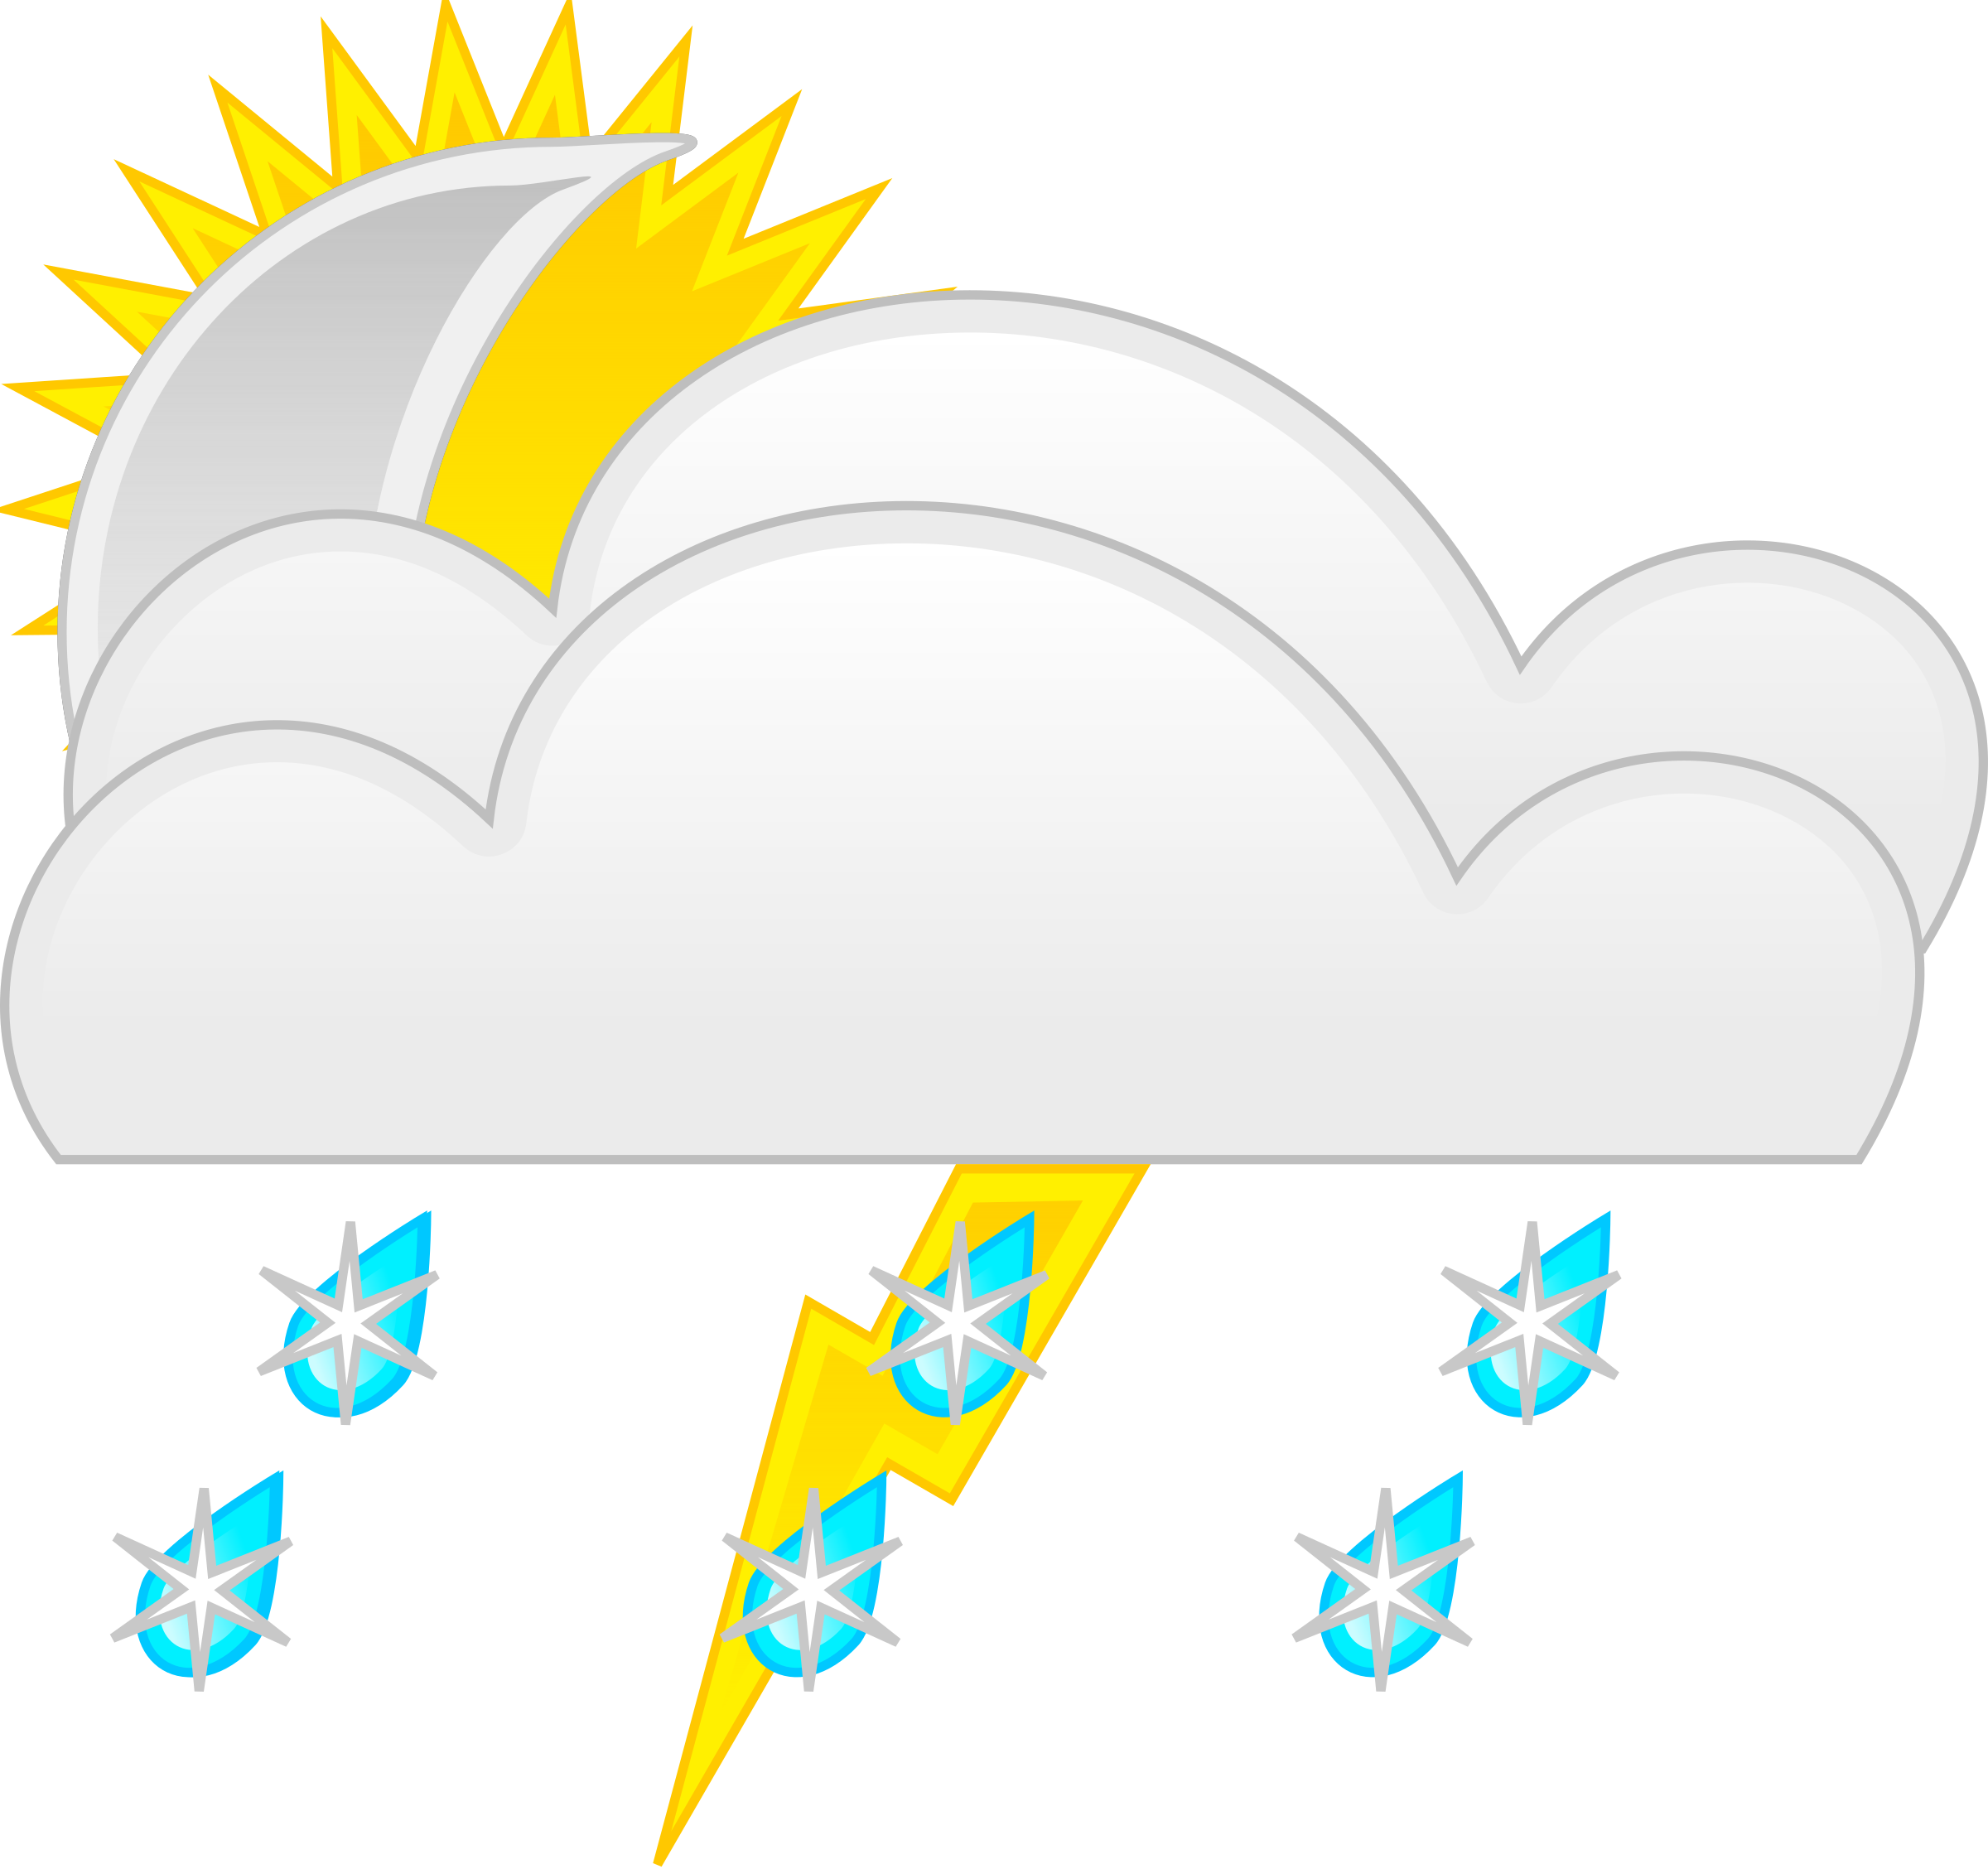 Clipart - weather symbols template